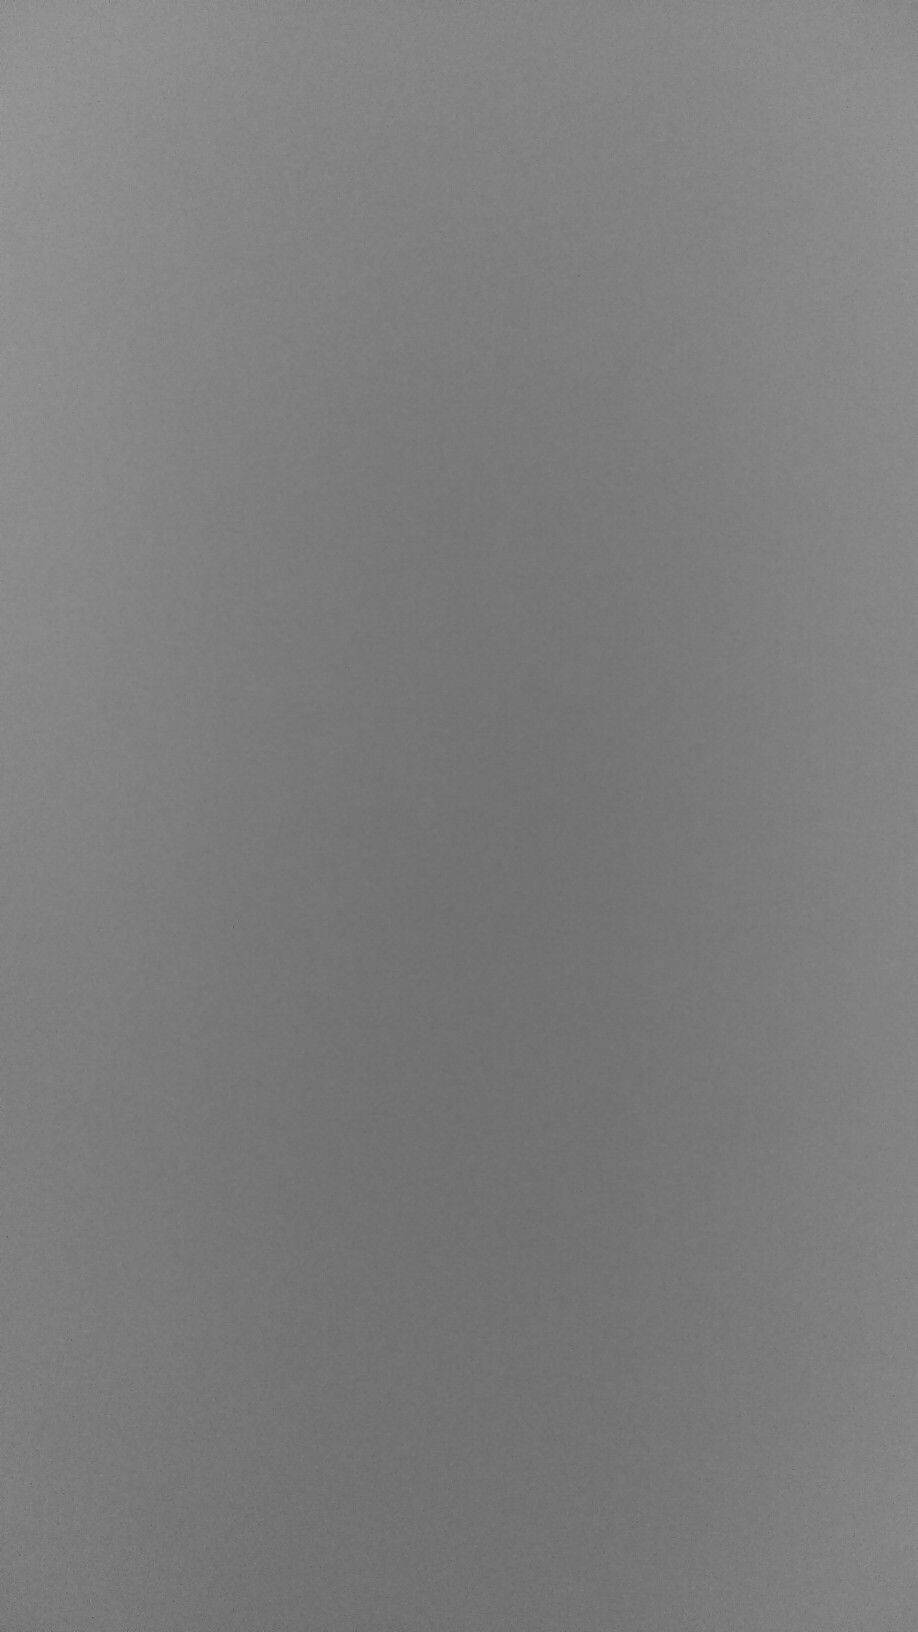 100+] Solid Grey Wallpapers